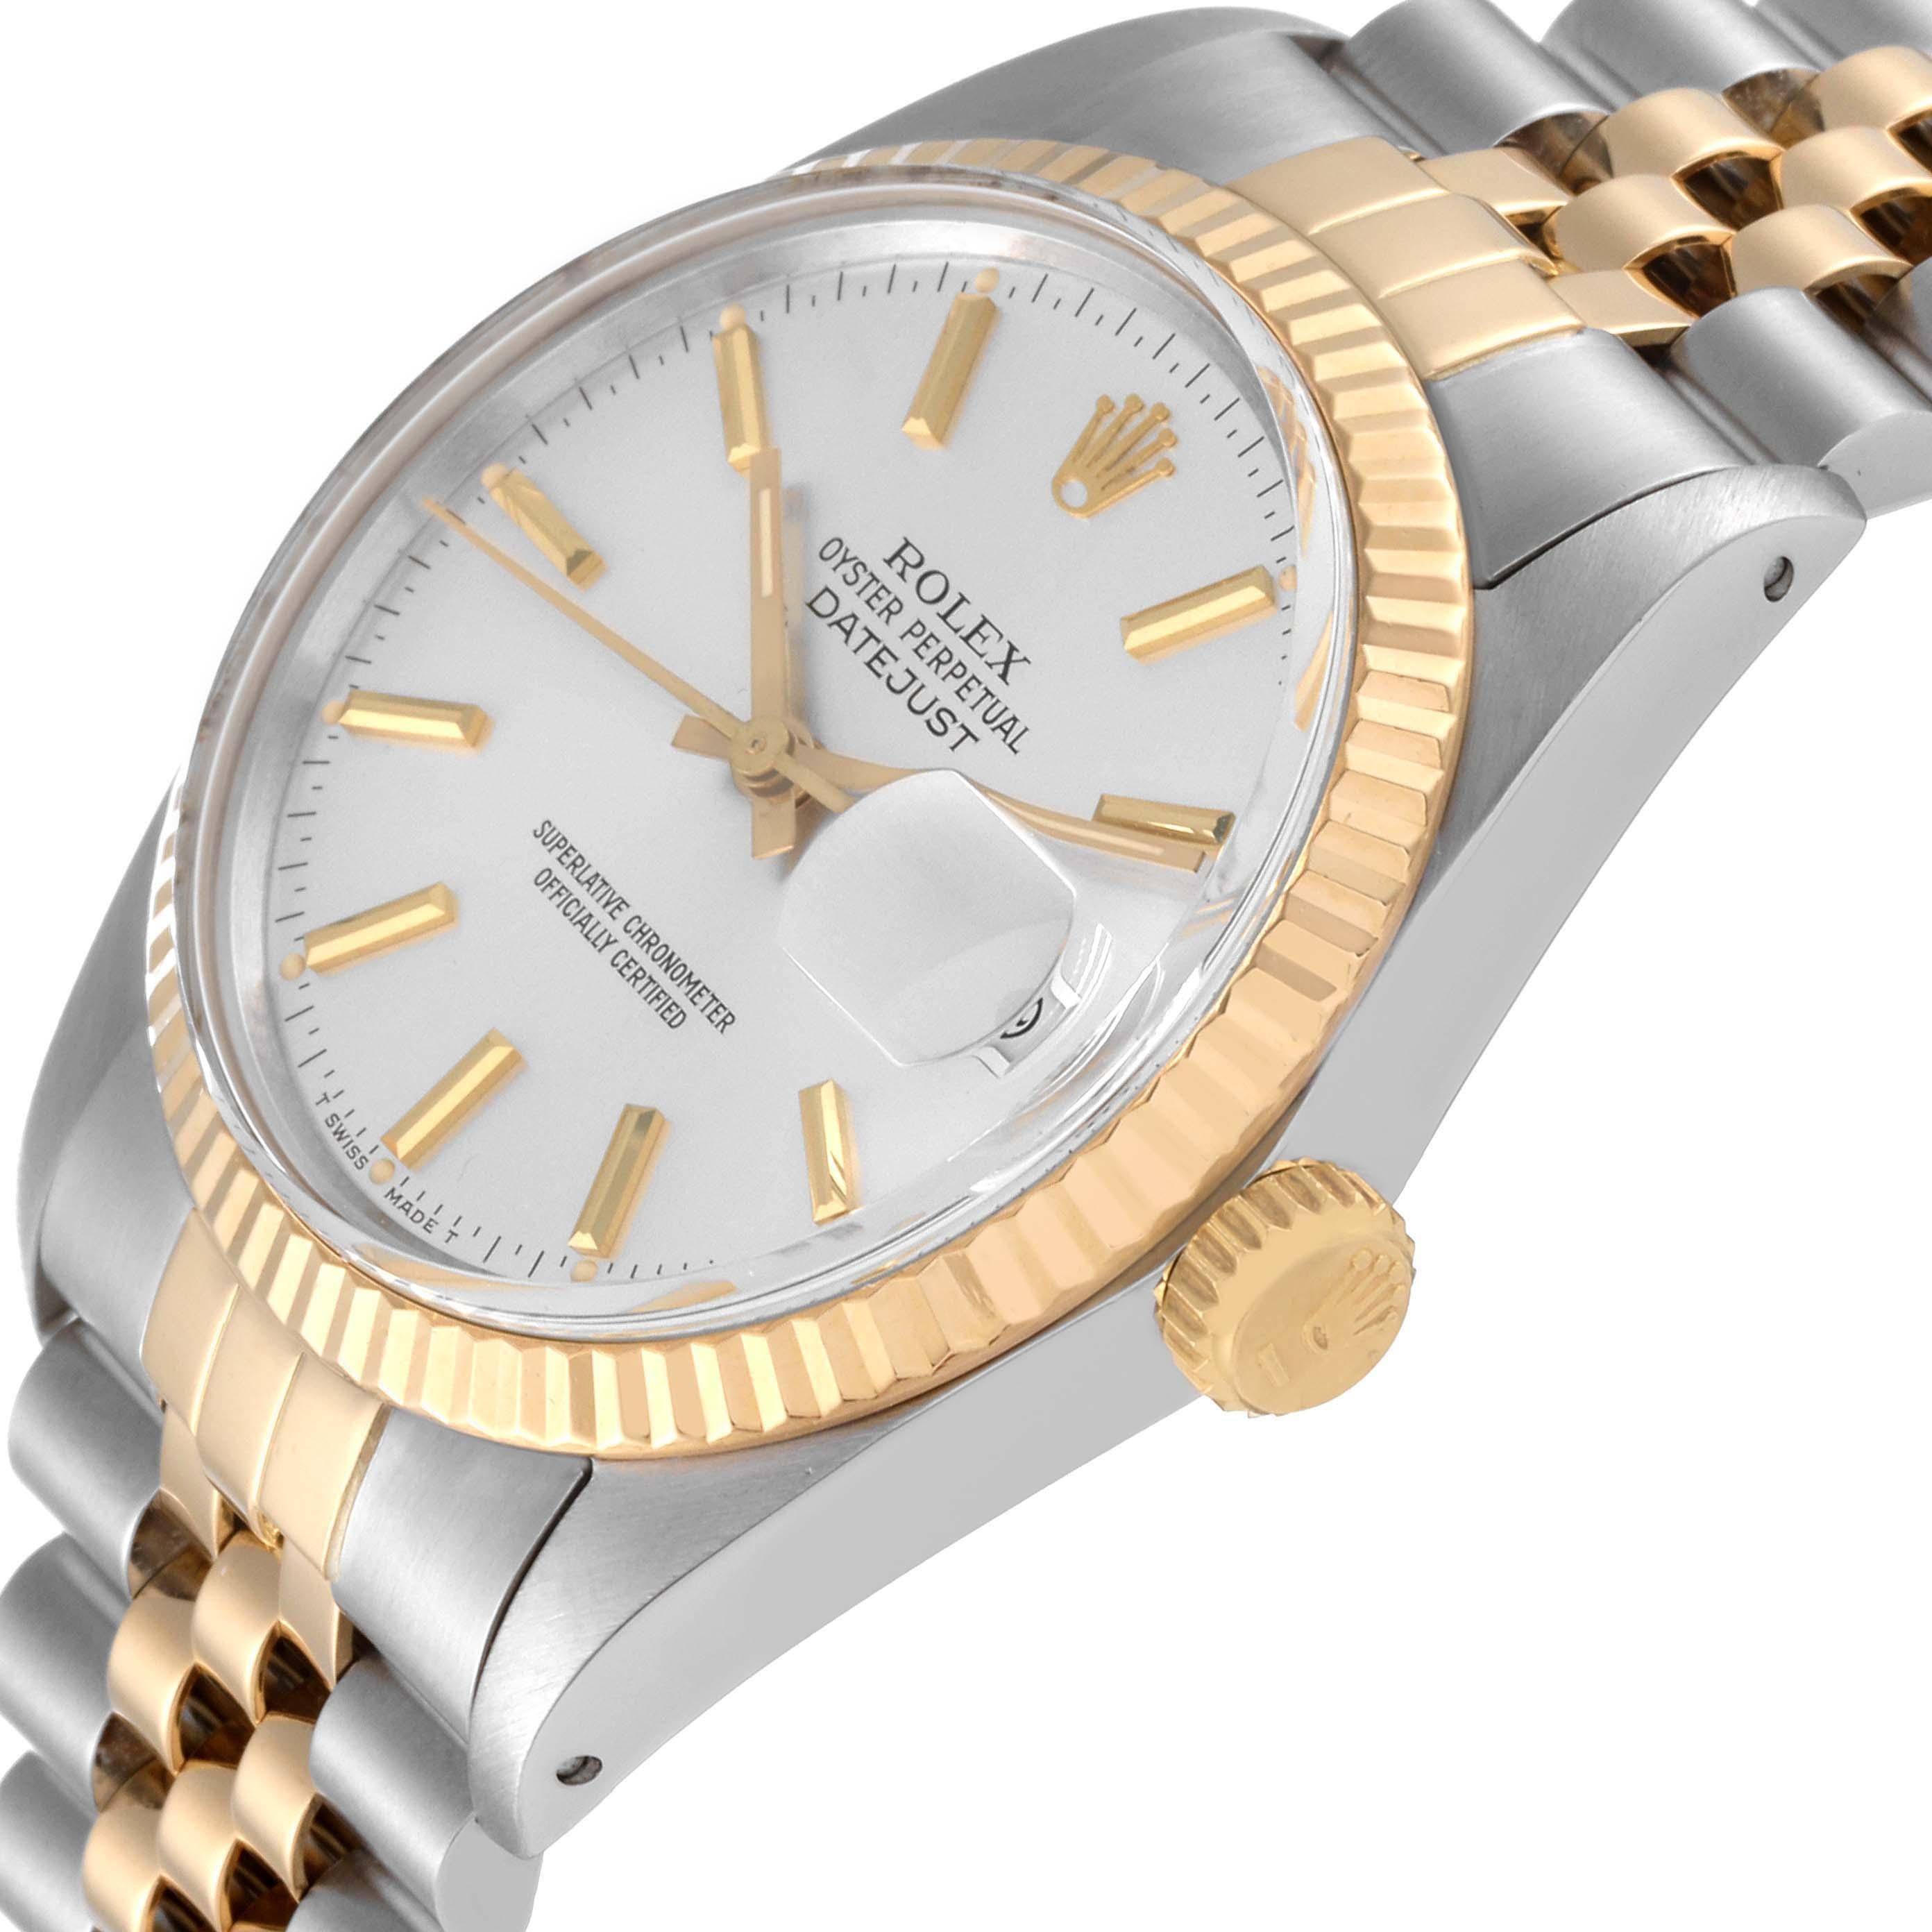 Rolex Datejust Steel Yellow Gold Silver Dial Vintage Mens Watch 16013 1